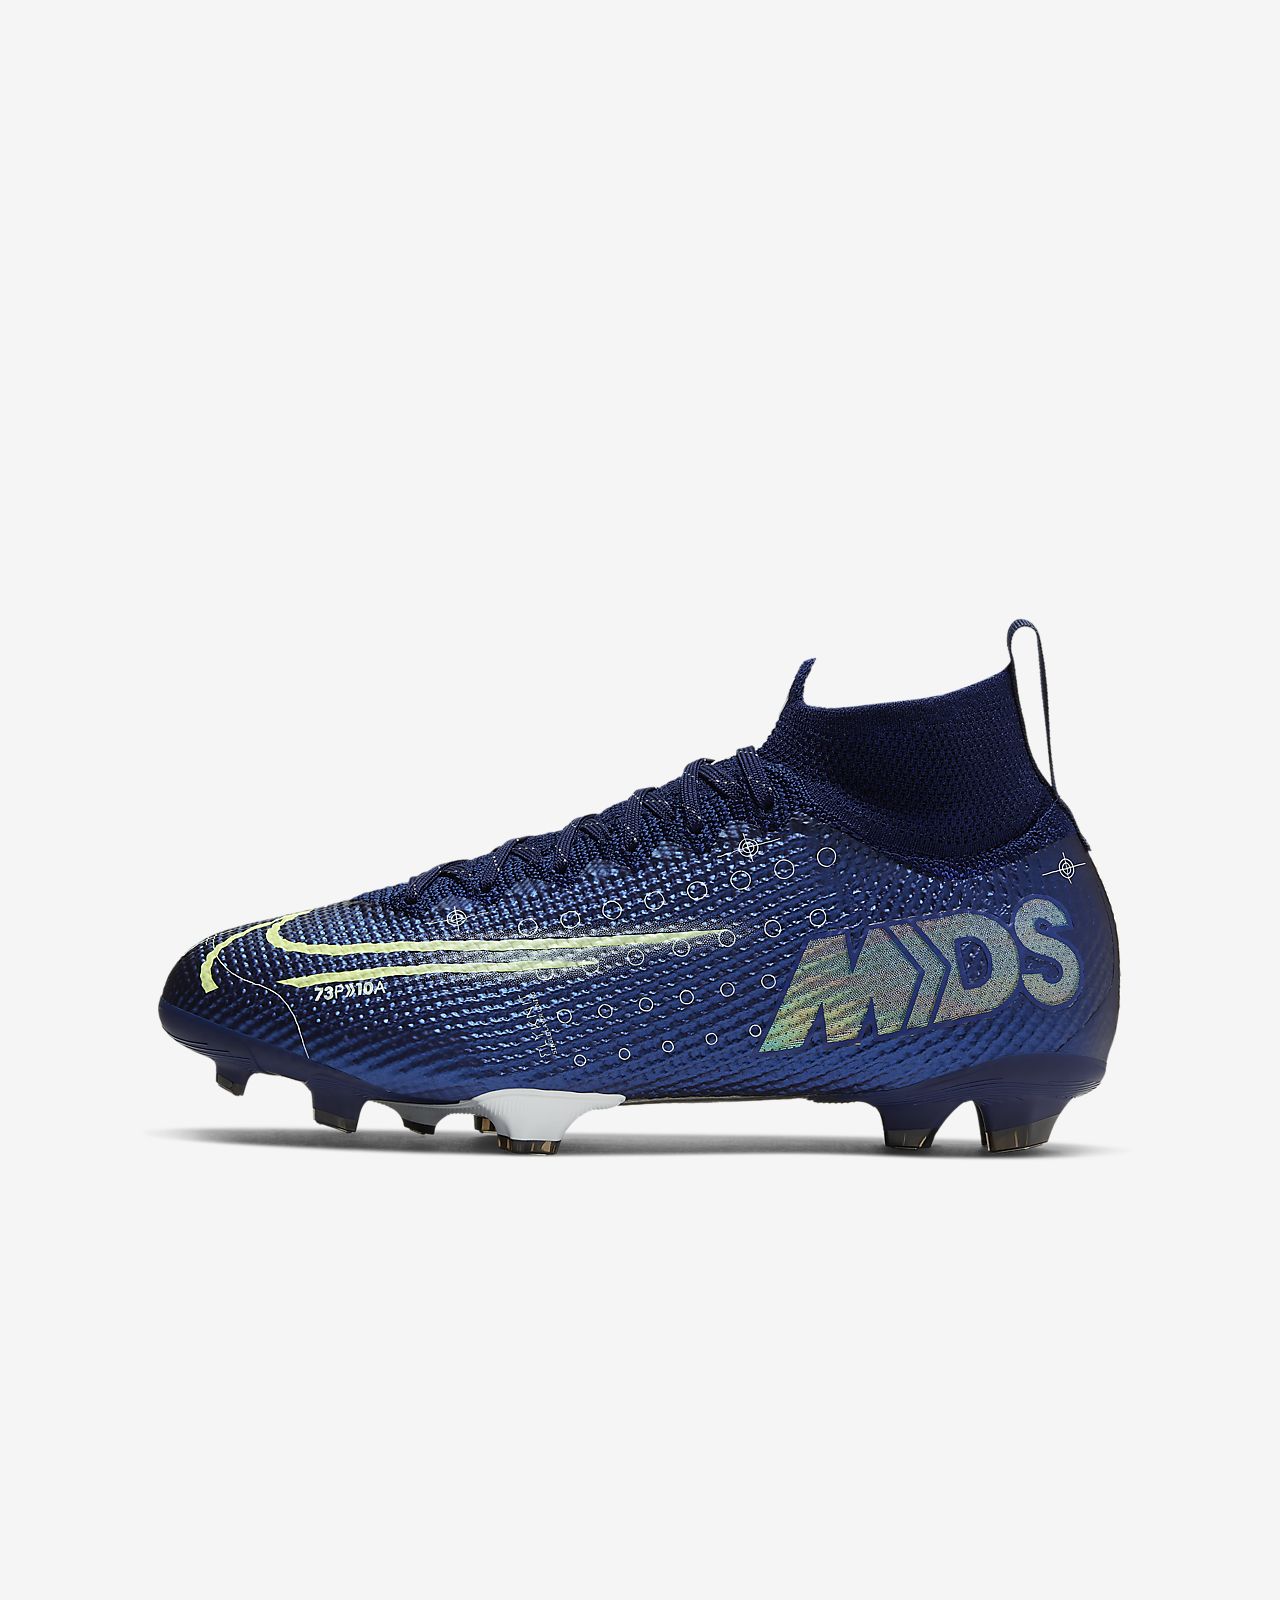 Buy Nike Mercurial Superfly 7 Elite Firm Ground Soccer Cleats.